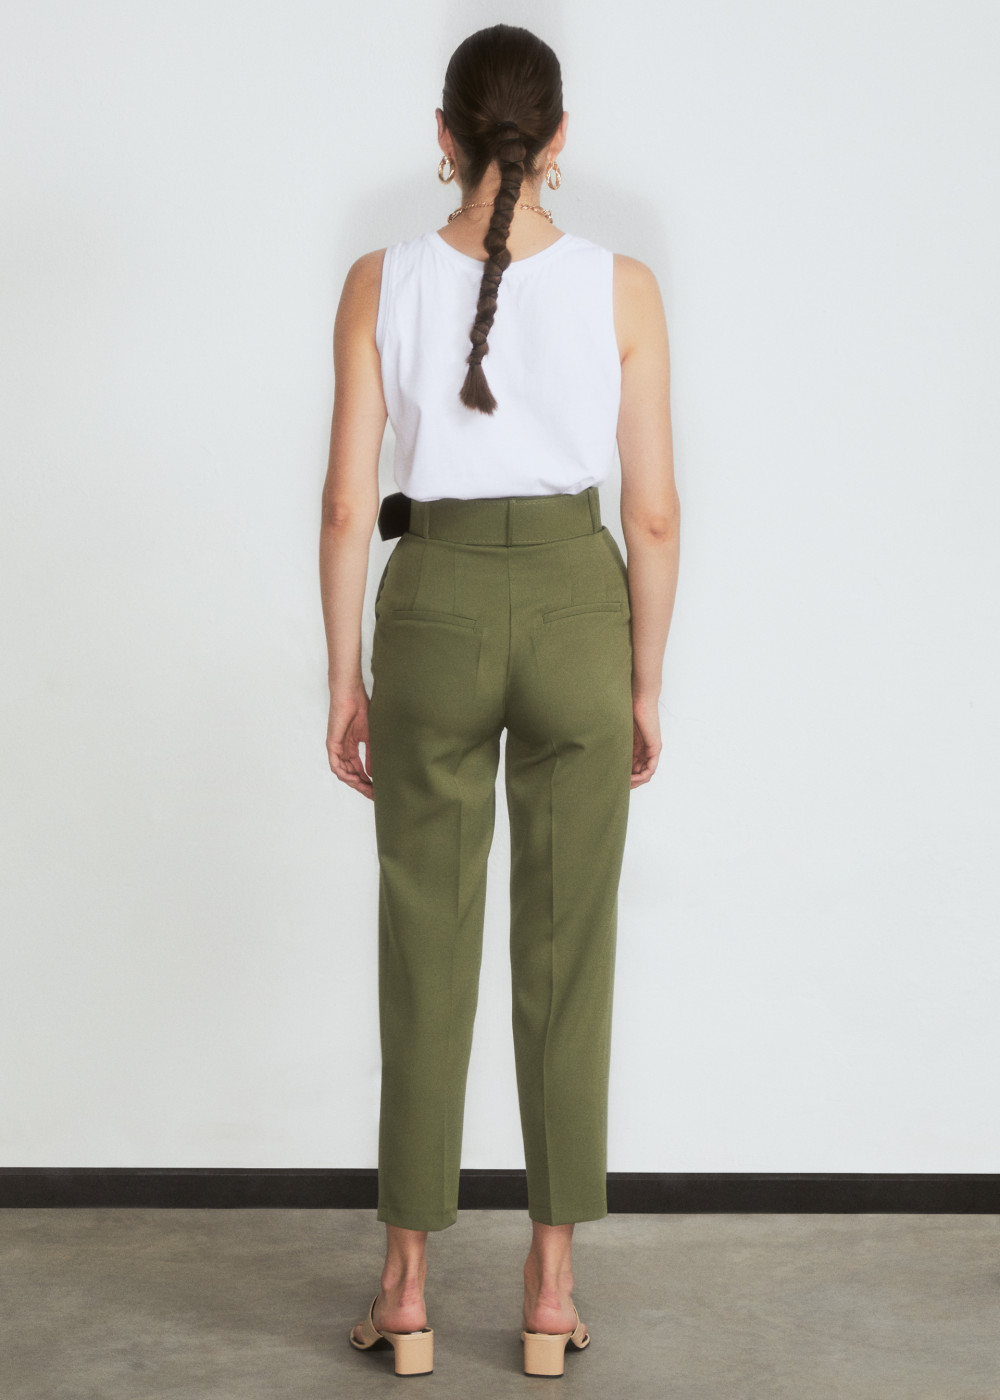 Pants With Covering Belt